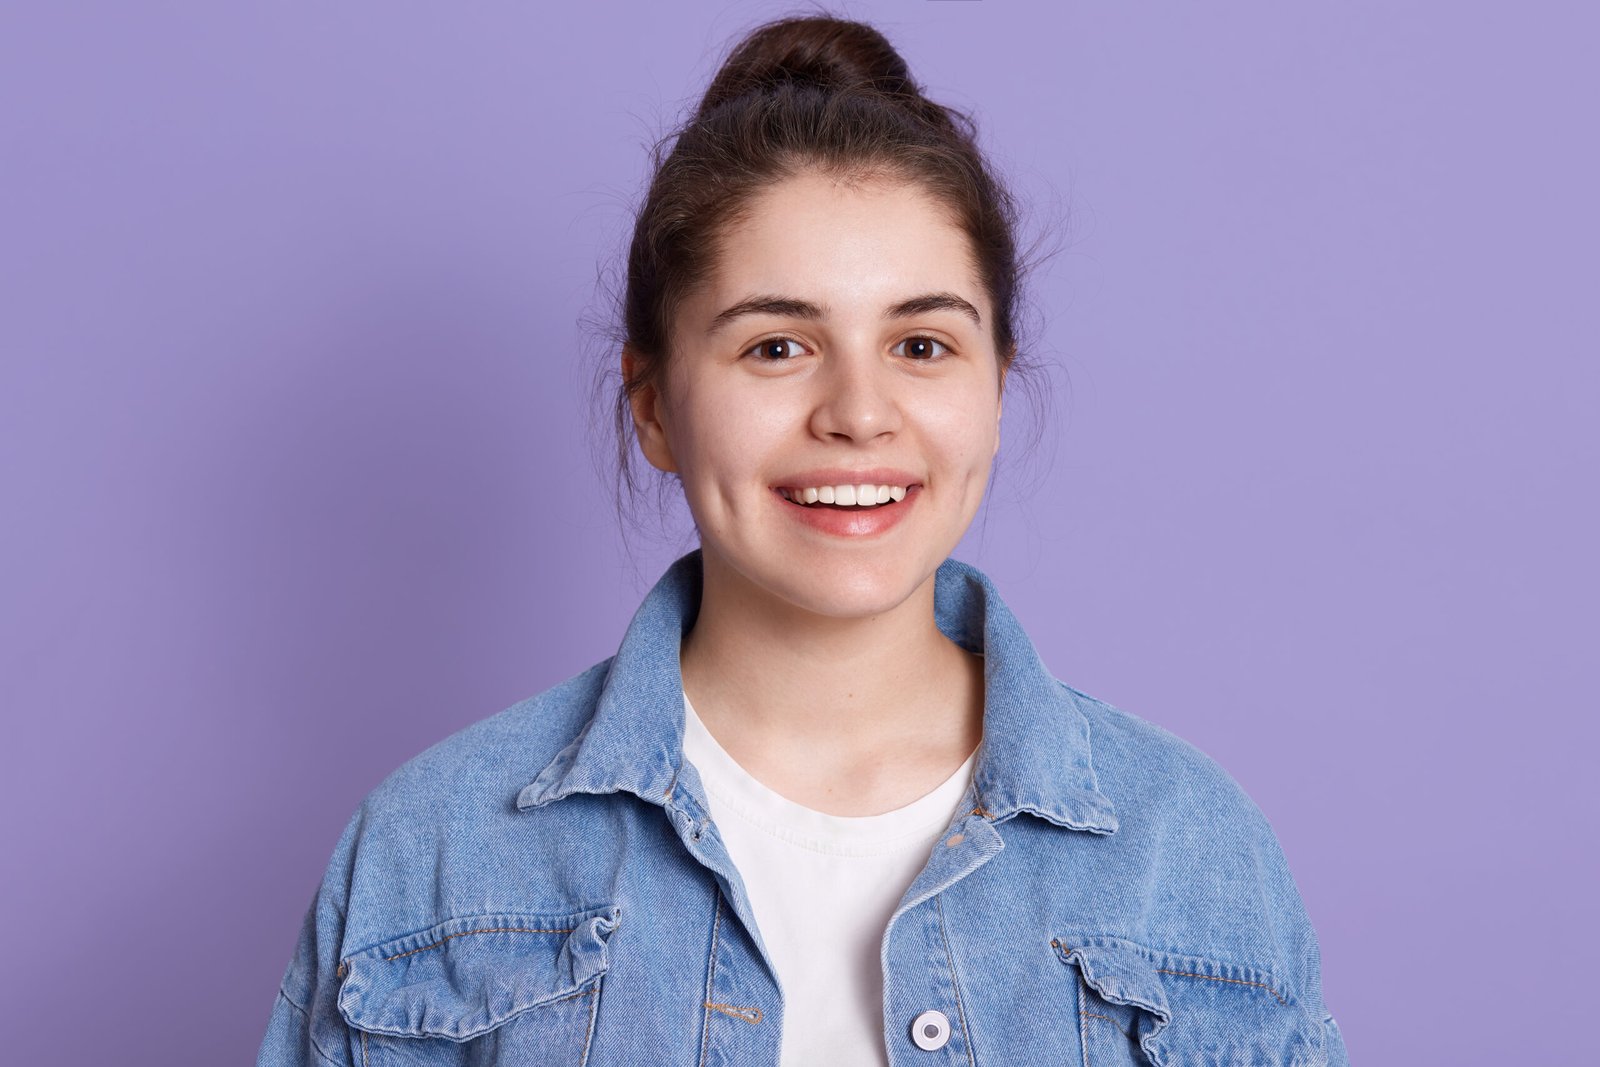 Smiling happy woman wearing denim jacket and white shirt, looking directly at camera with toothy smile, lady with hair bun, posing isolated over lilac background.